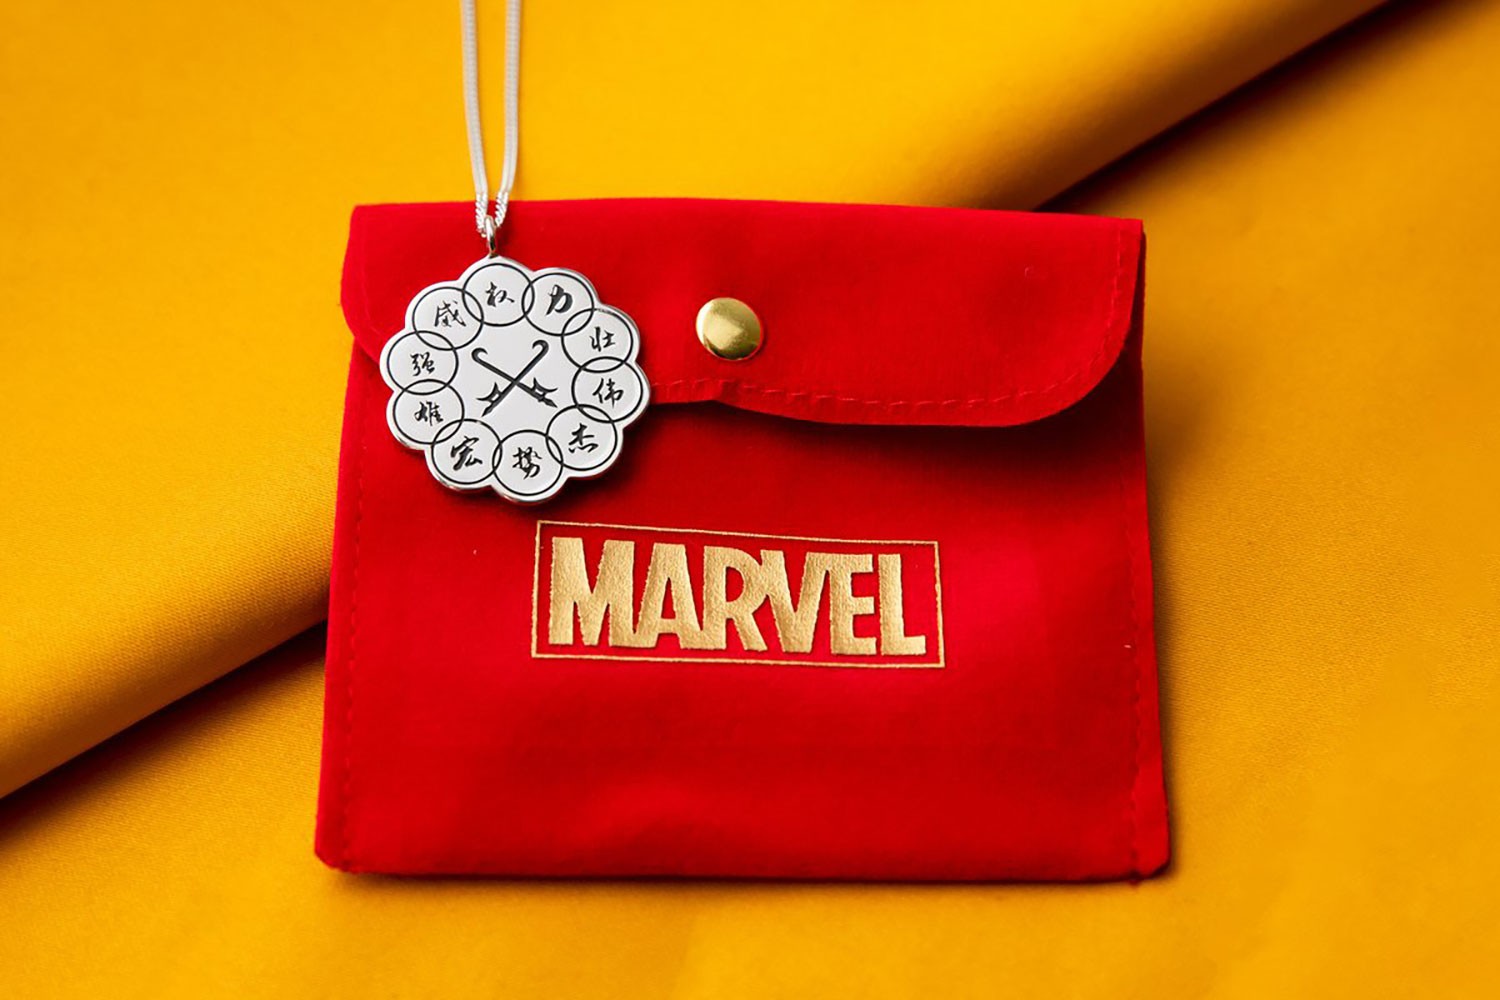 Shang-Chi The Ten Rings Insignia Necklace- Prototype Shown